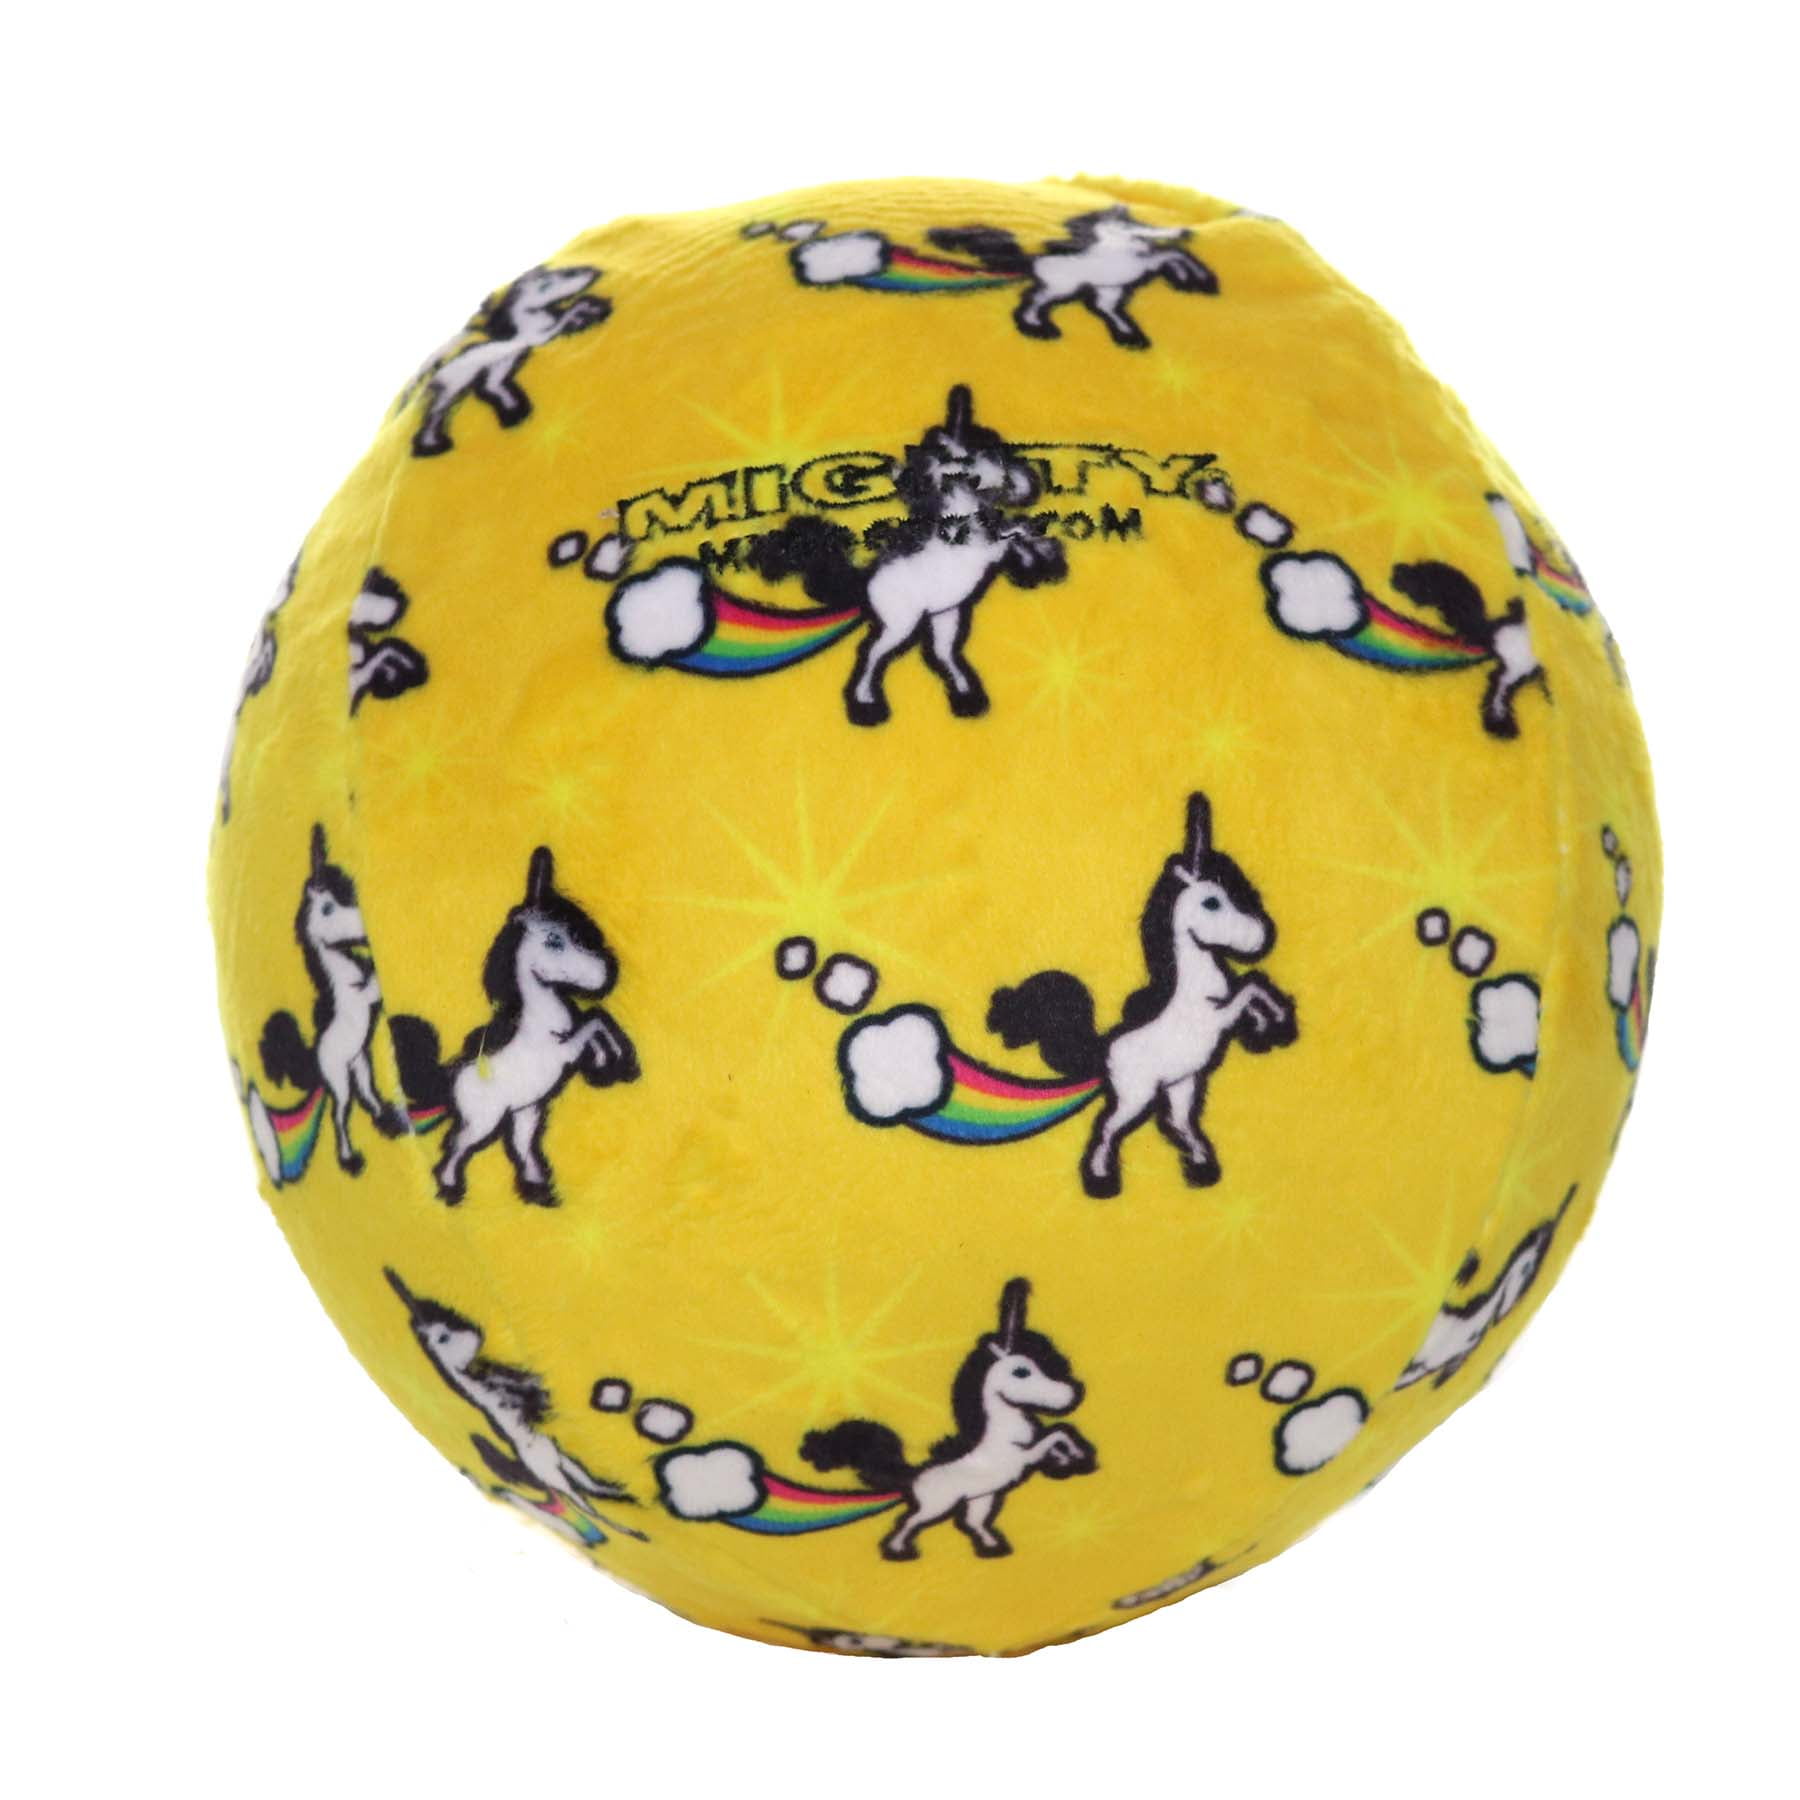 mighty ball dog toy